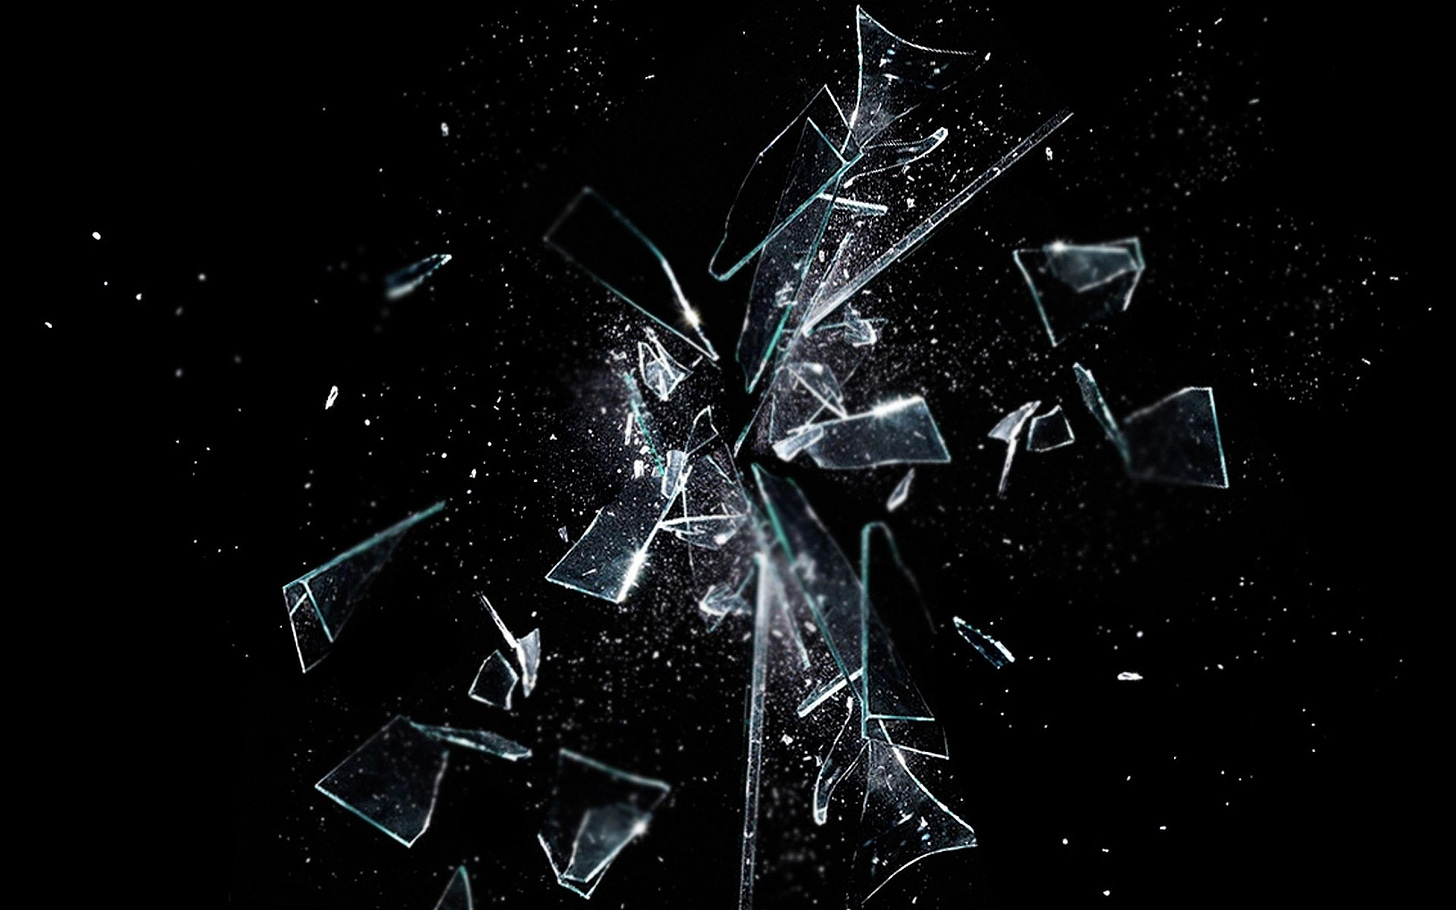 Image of shattered glass